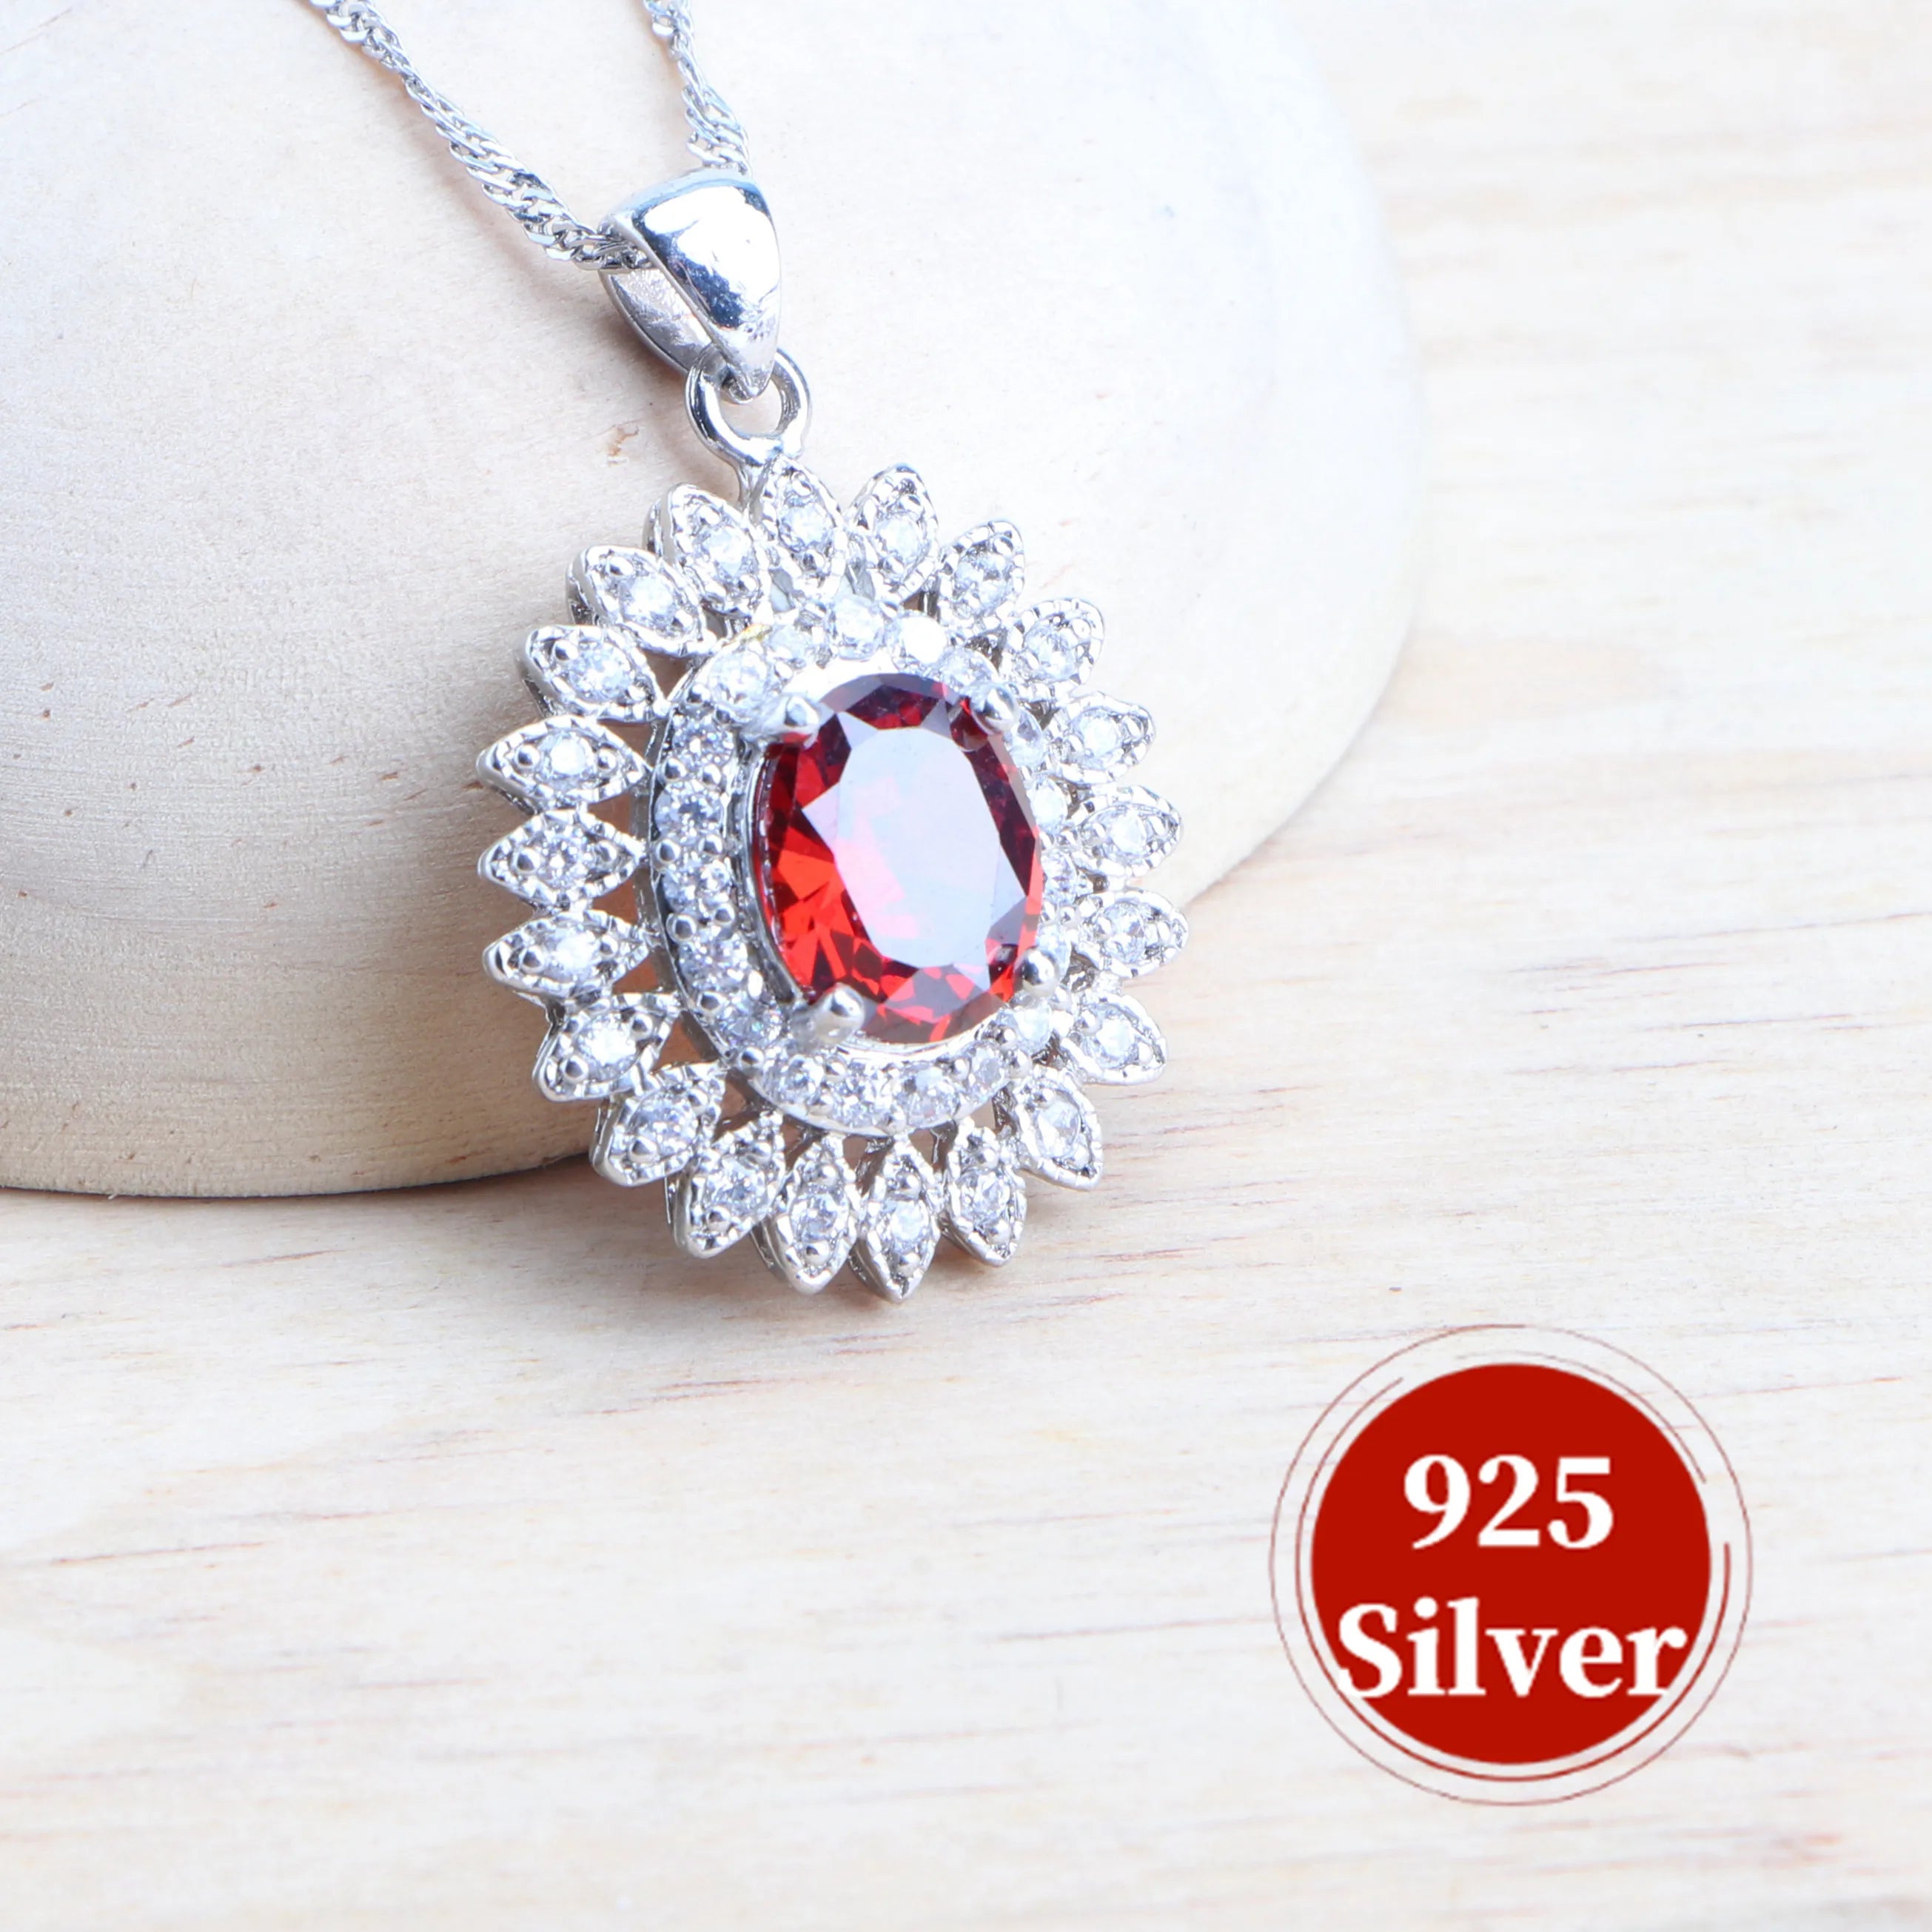 Fine 925 Sterling Silver Jewelry Sets - The Trend